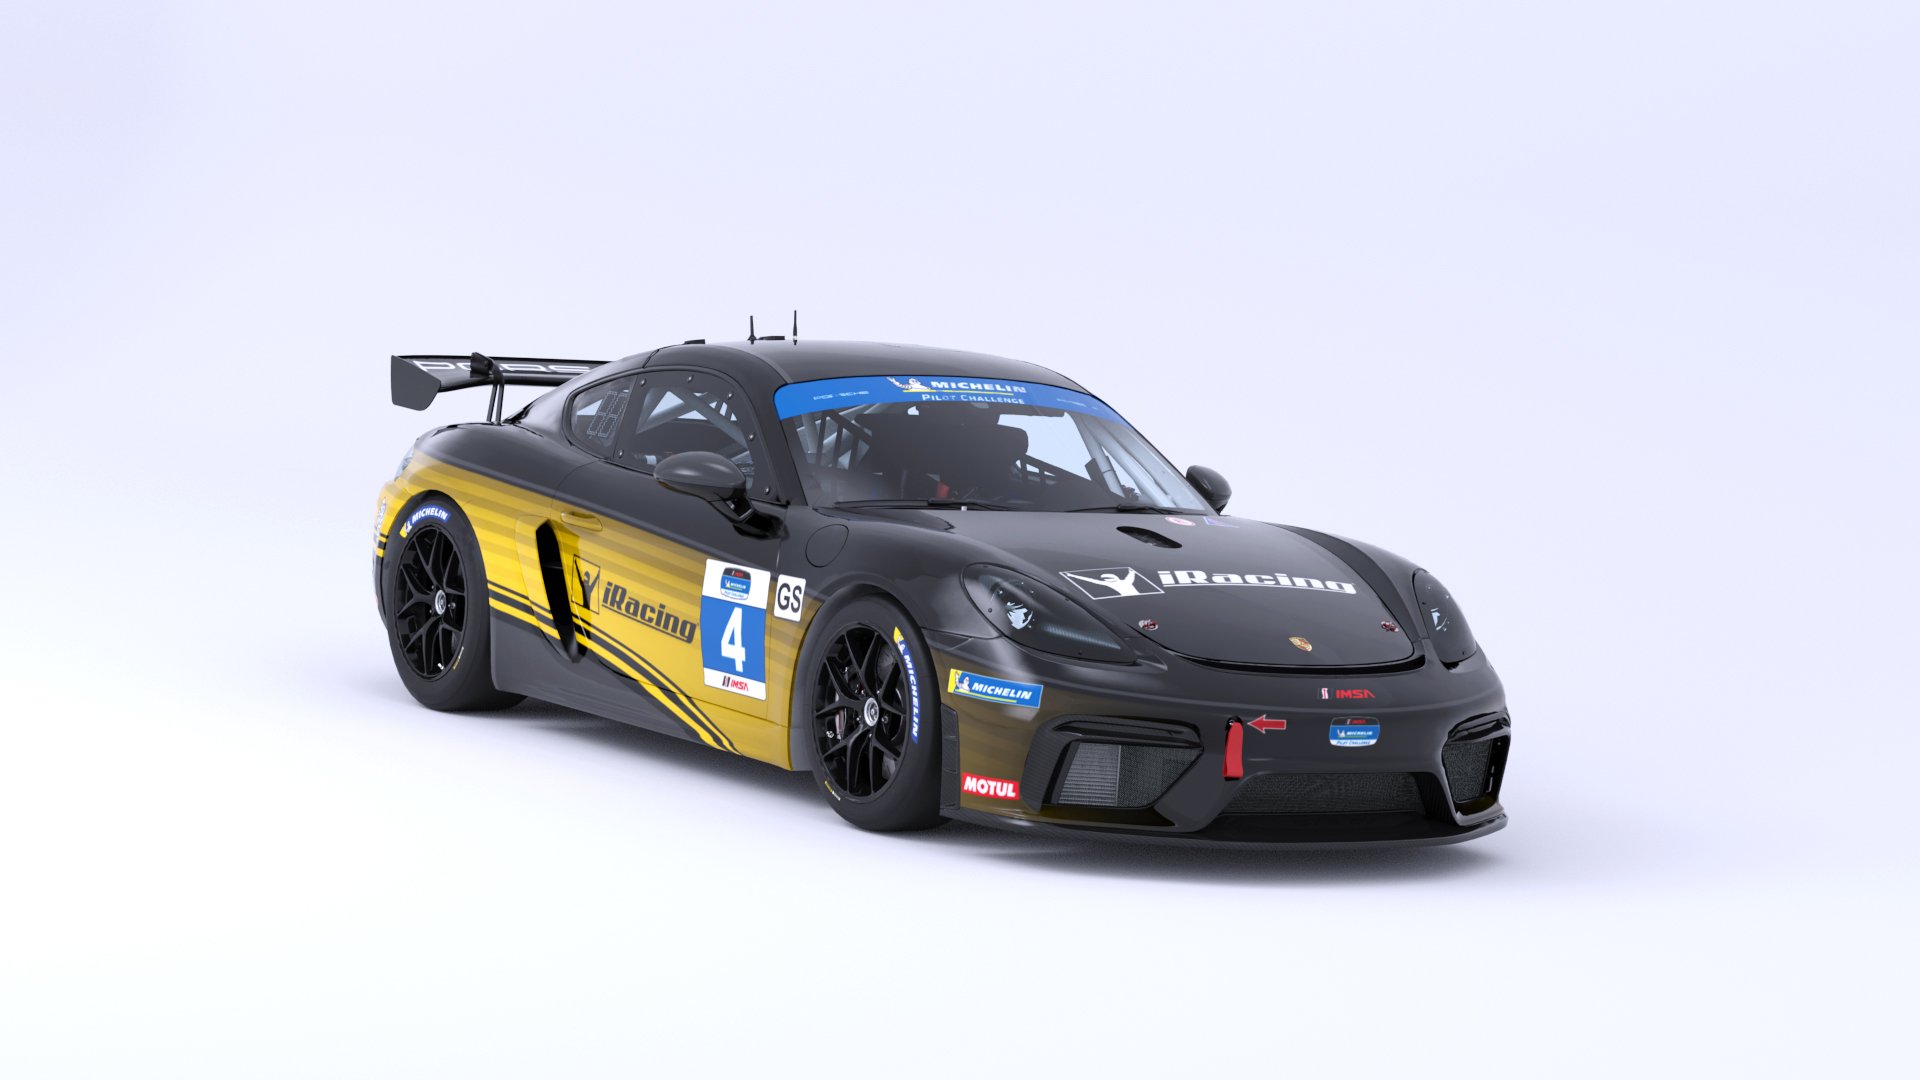 More information about "iRacing presenta in video la Porsche 718 Cayman GT4 Clubsport MR"